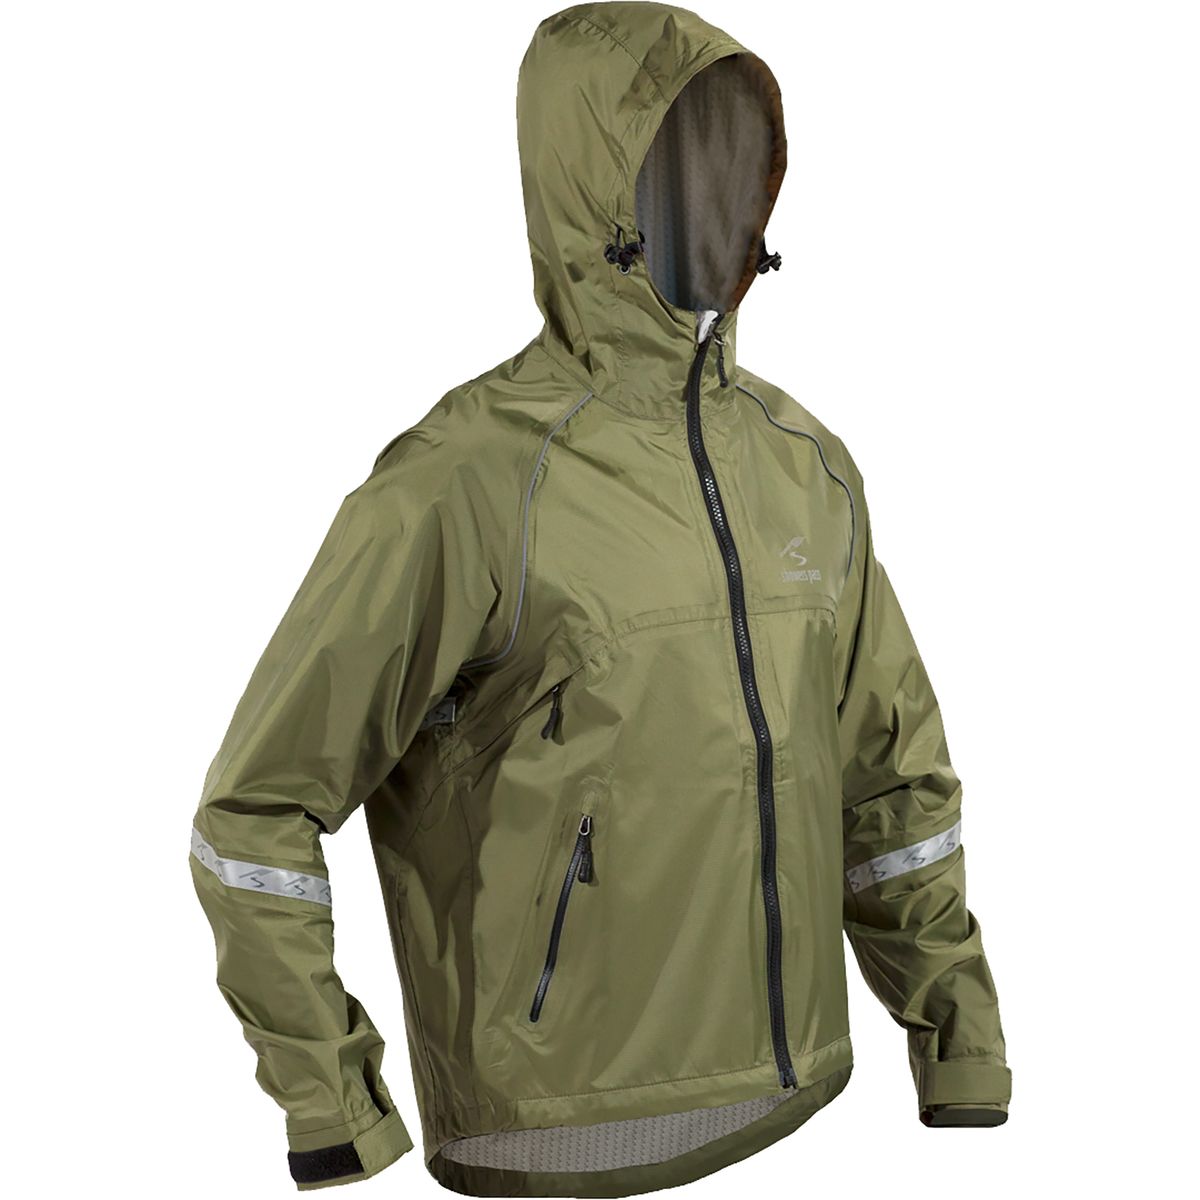 Showers Pass Crossover Jacket Mens